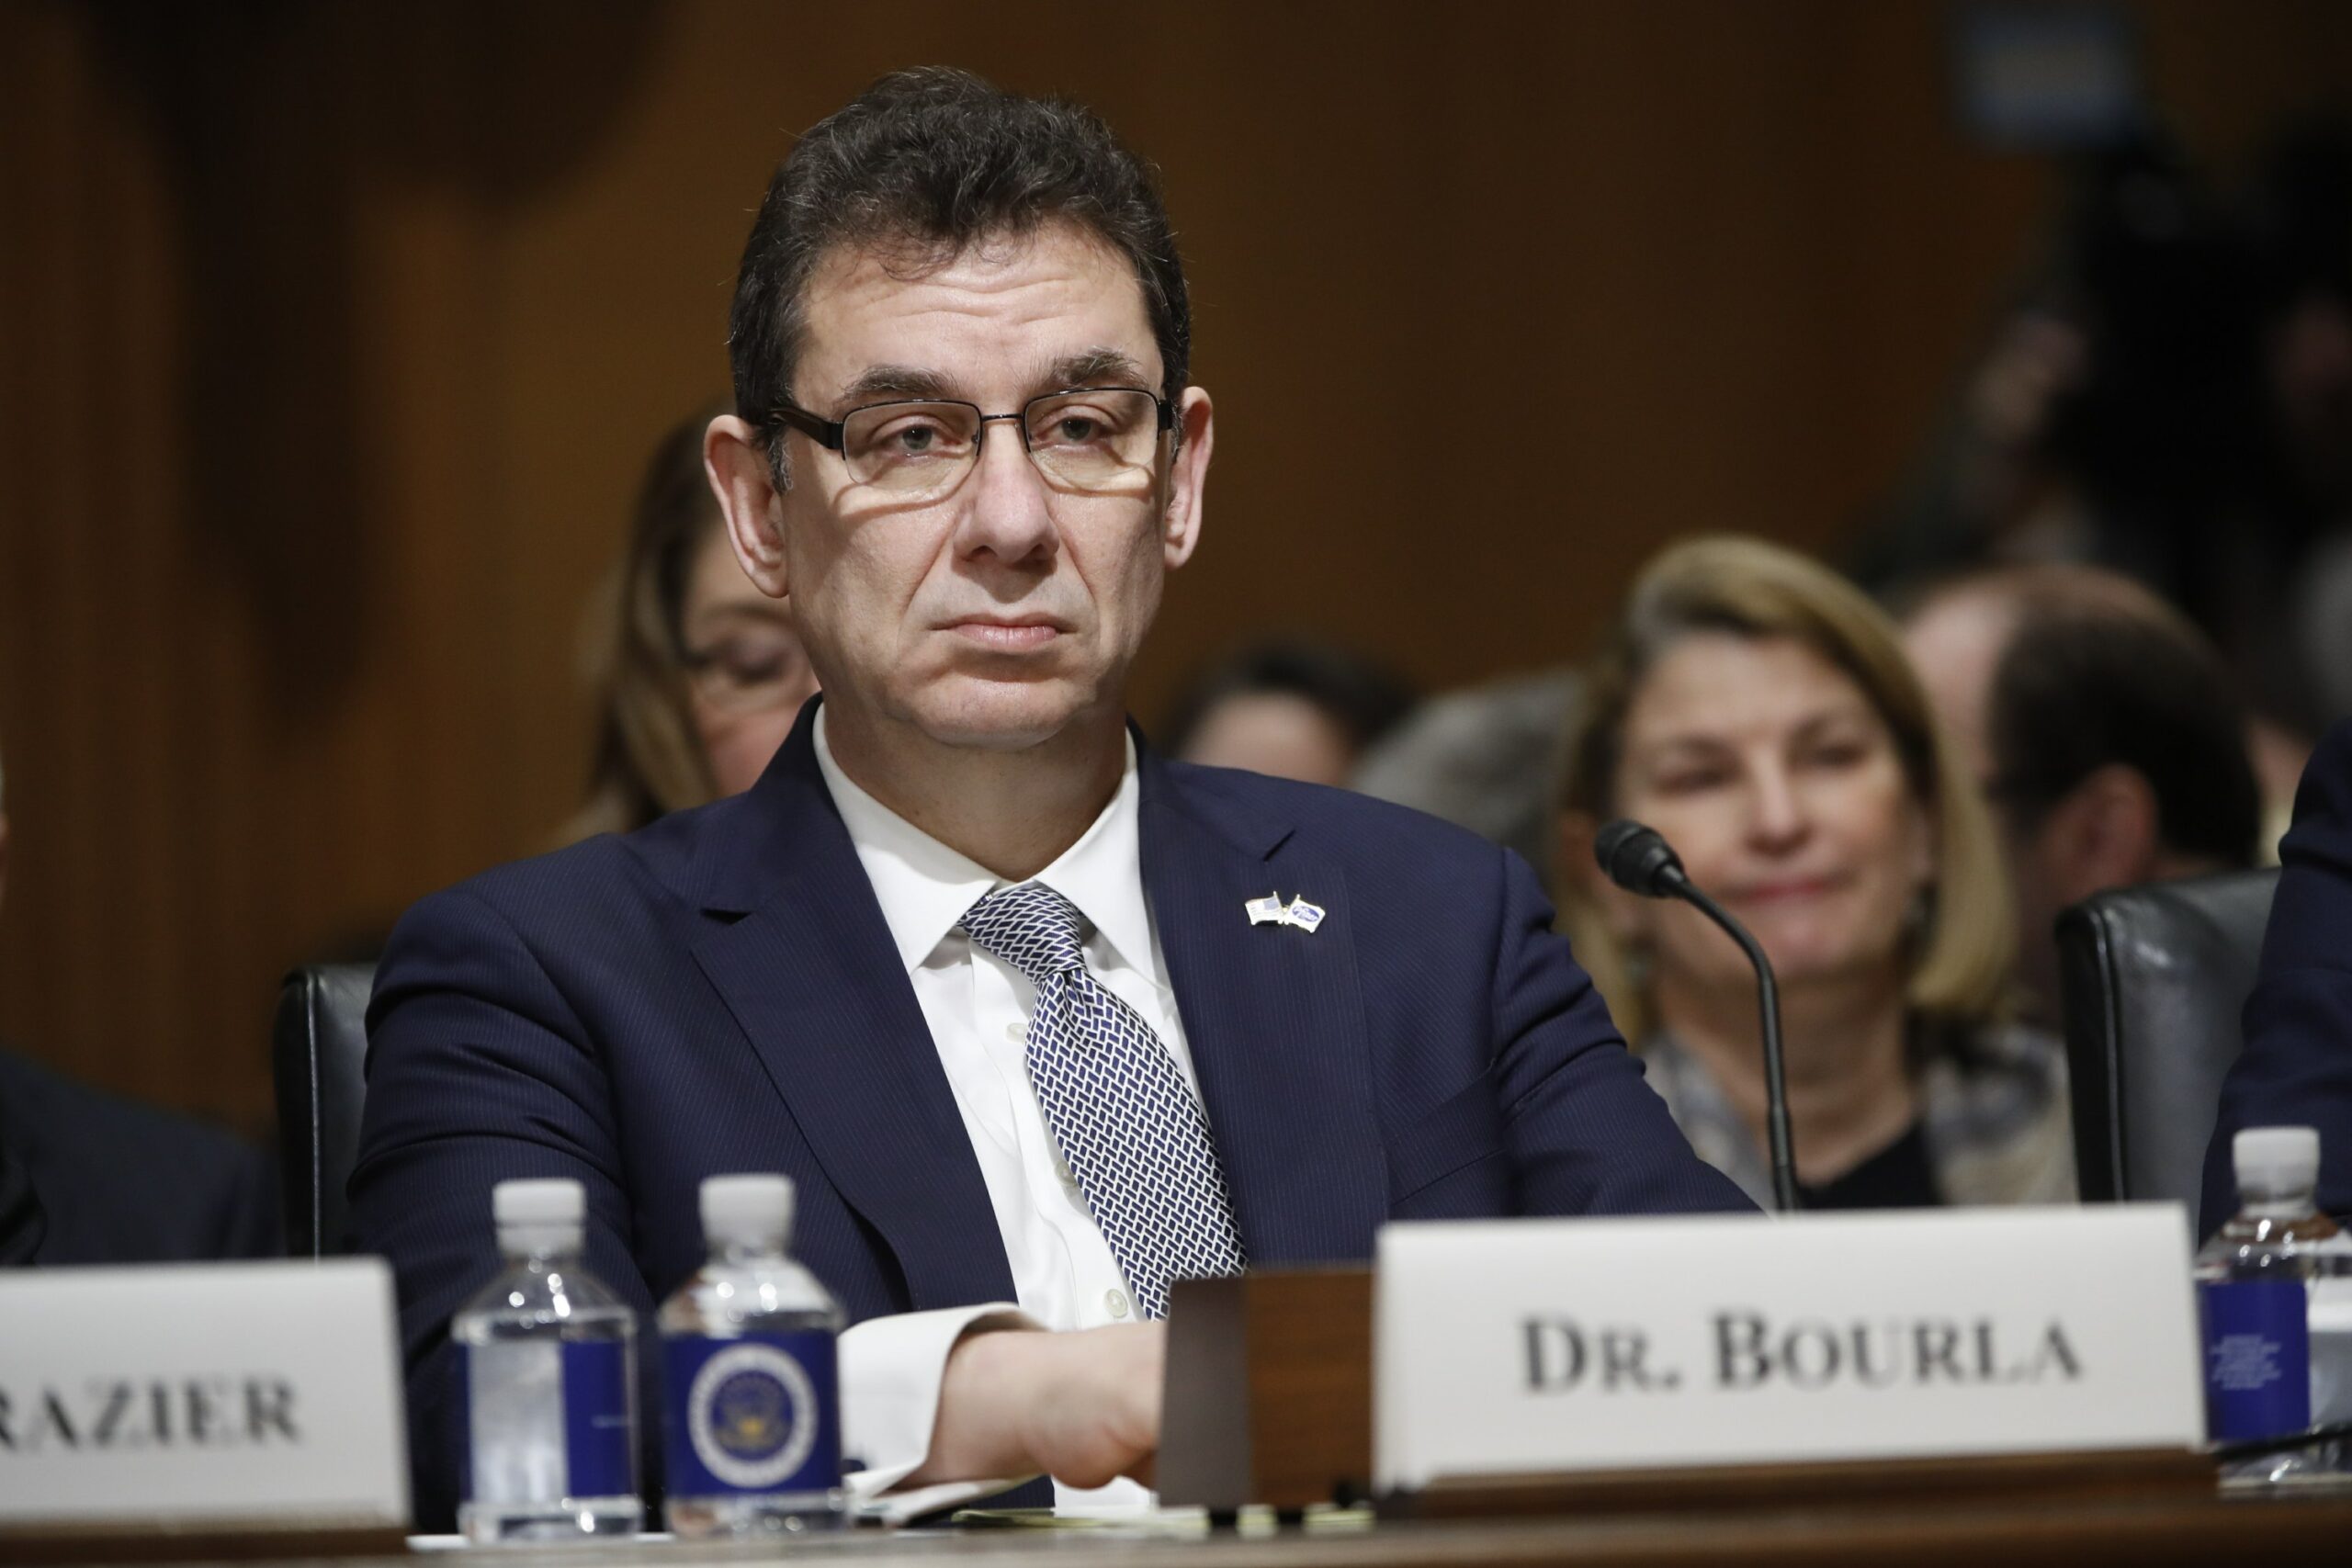 Albert Bourla: Is the Pfizer CEO Arrested? The Truth Behind the Claims